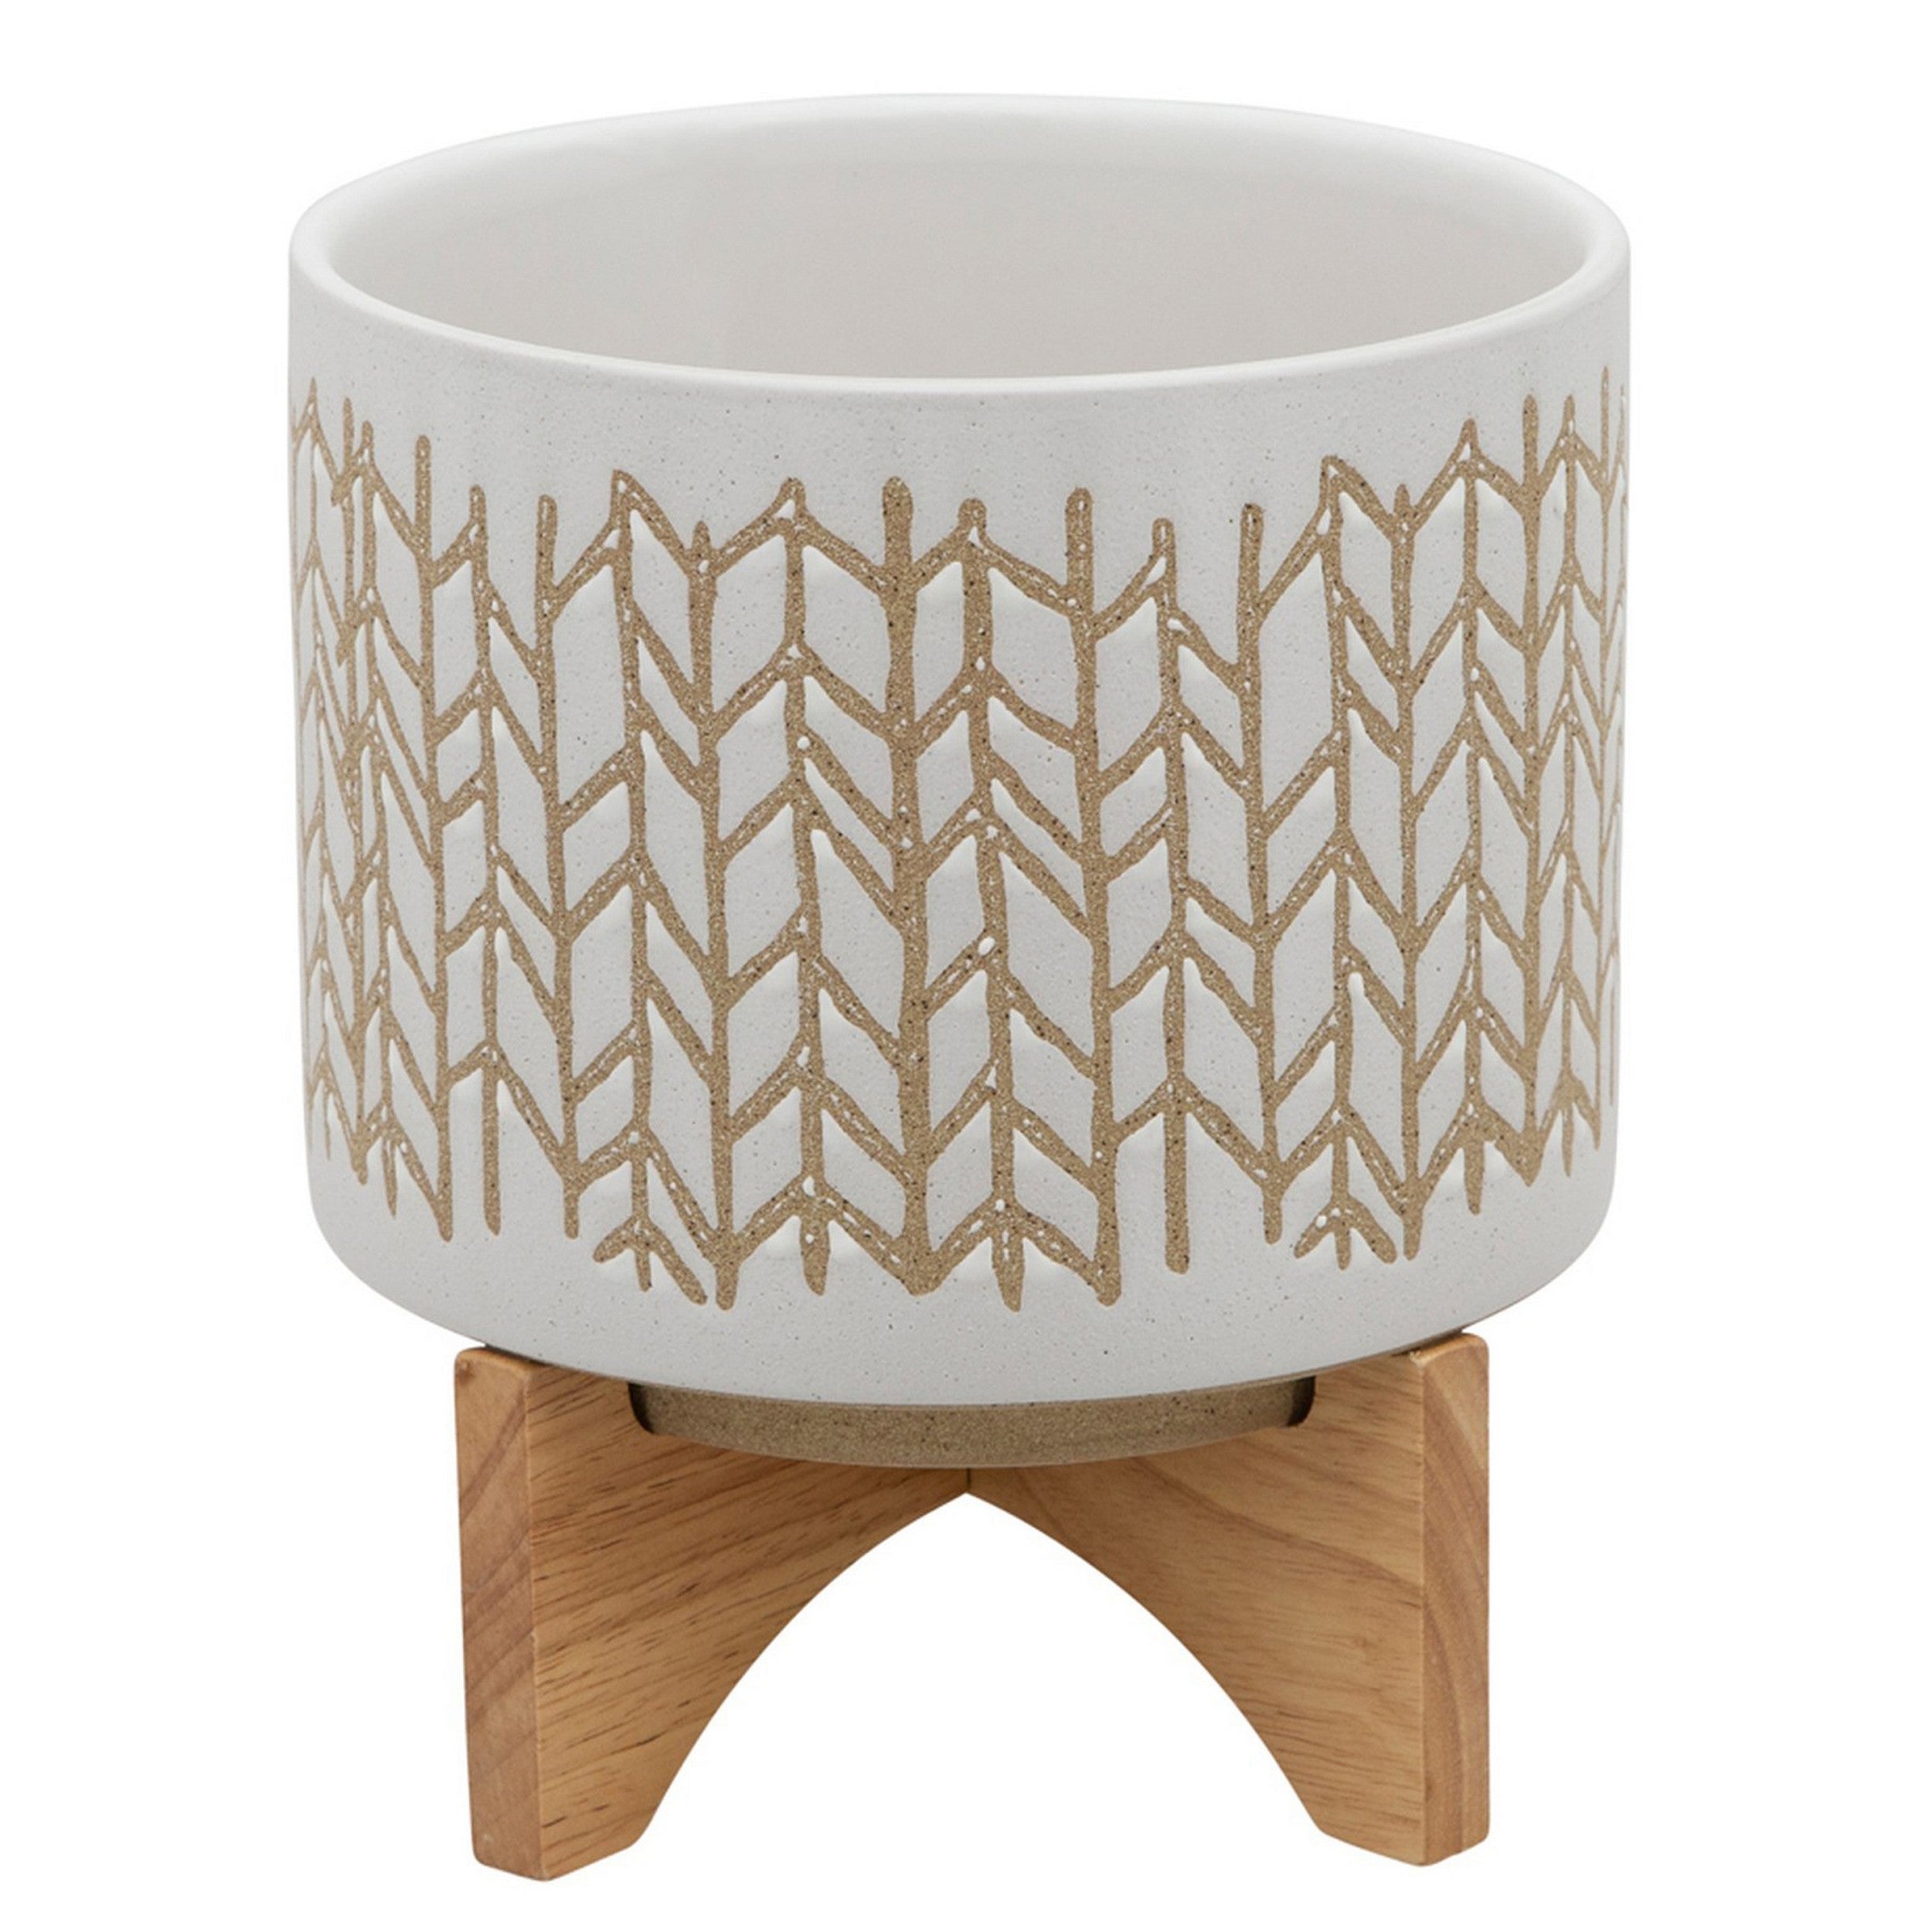 Planter-with--Chevron-Pattern-and-Wooden-Stand,-Large,-Off-White-Pots-&-Planters